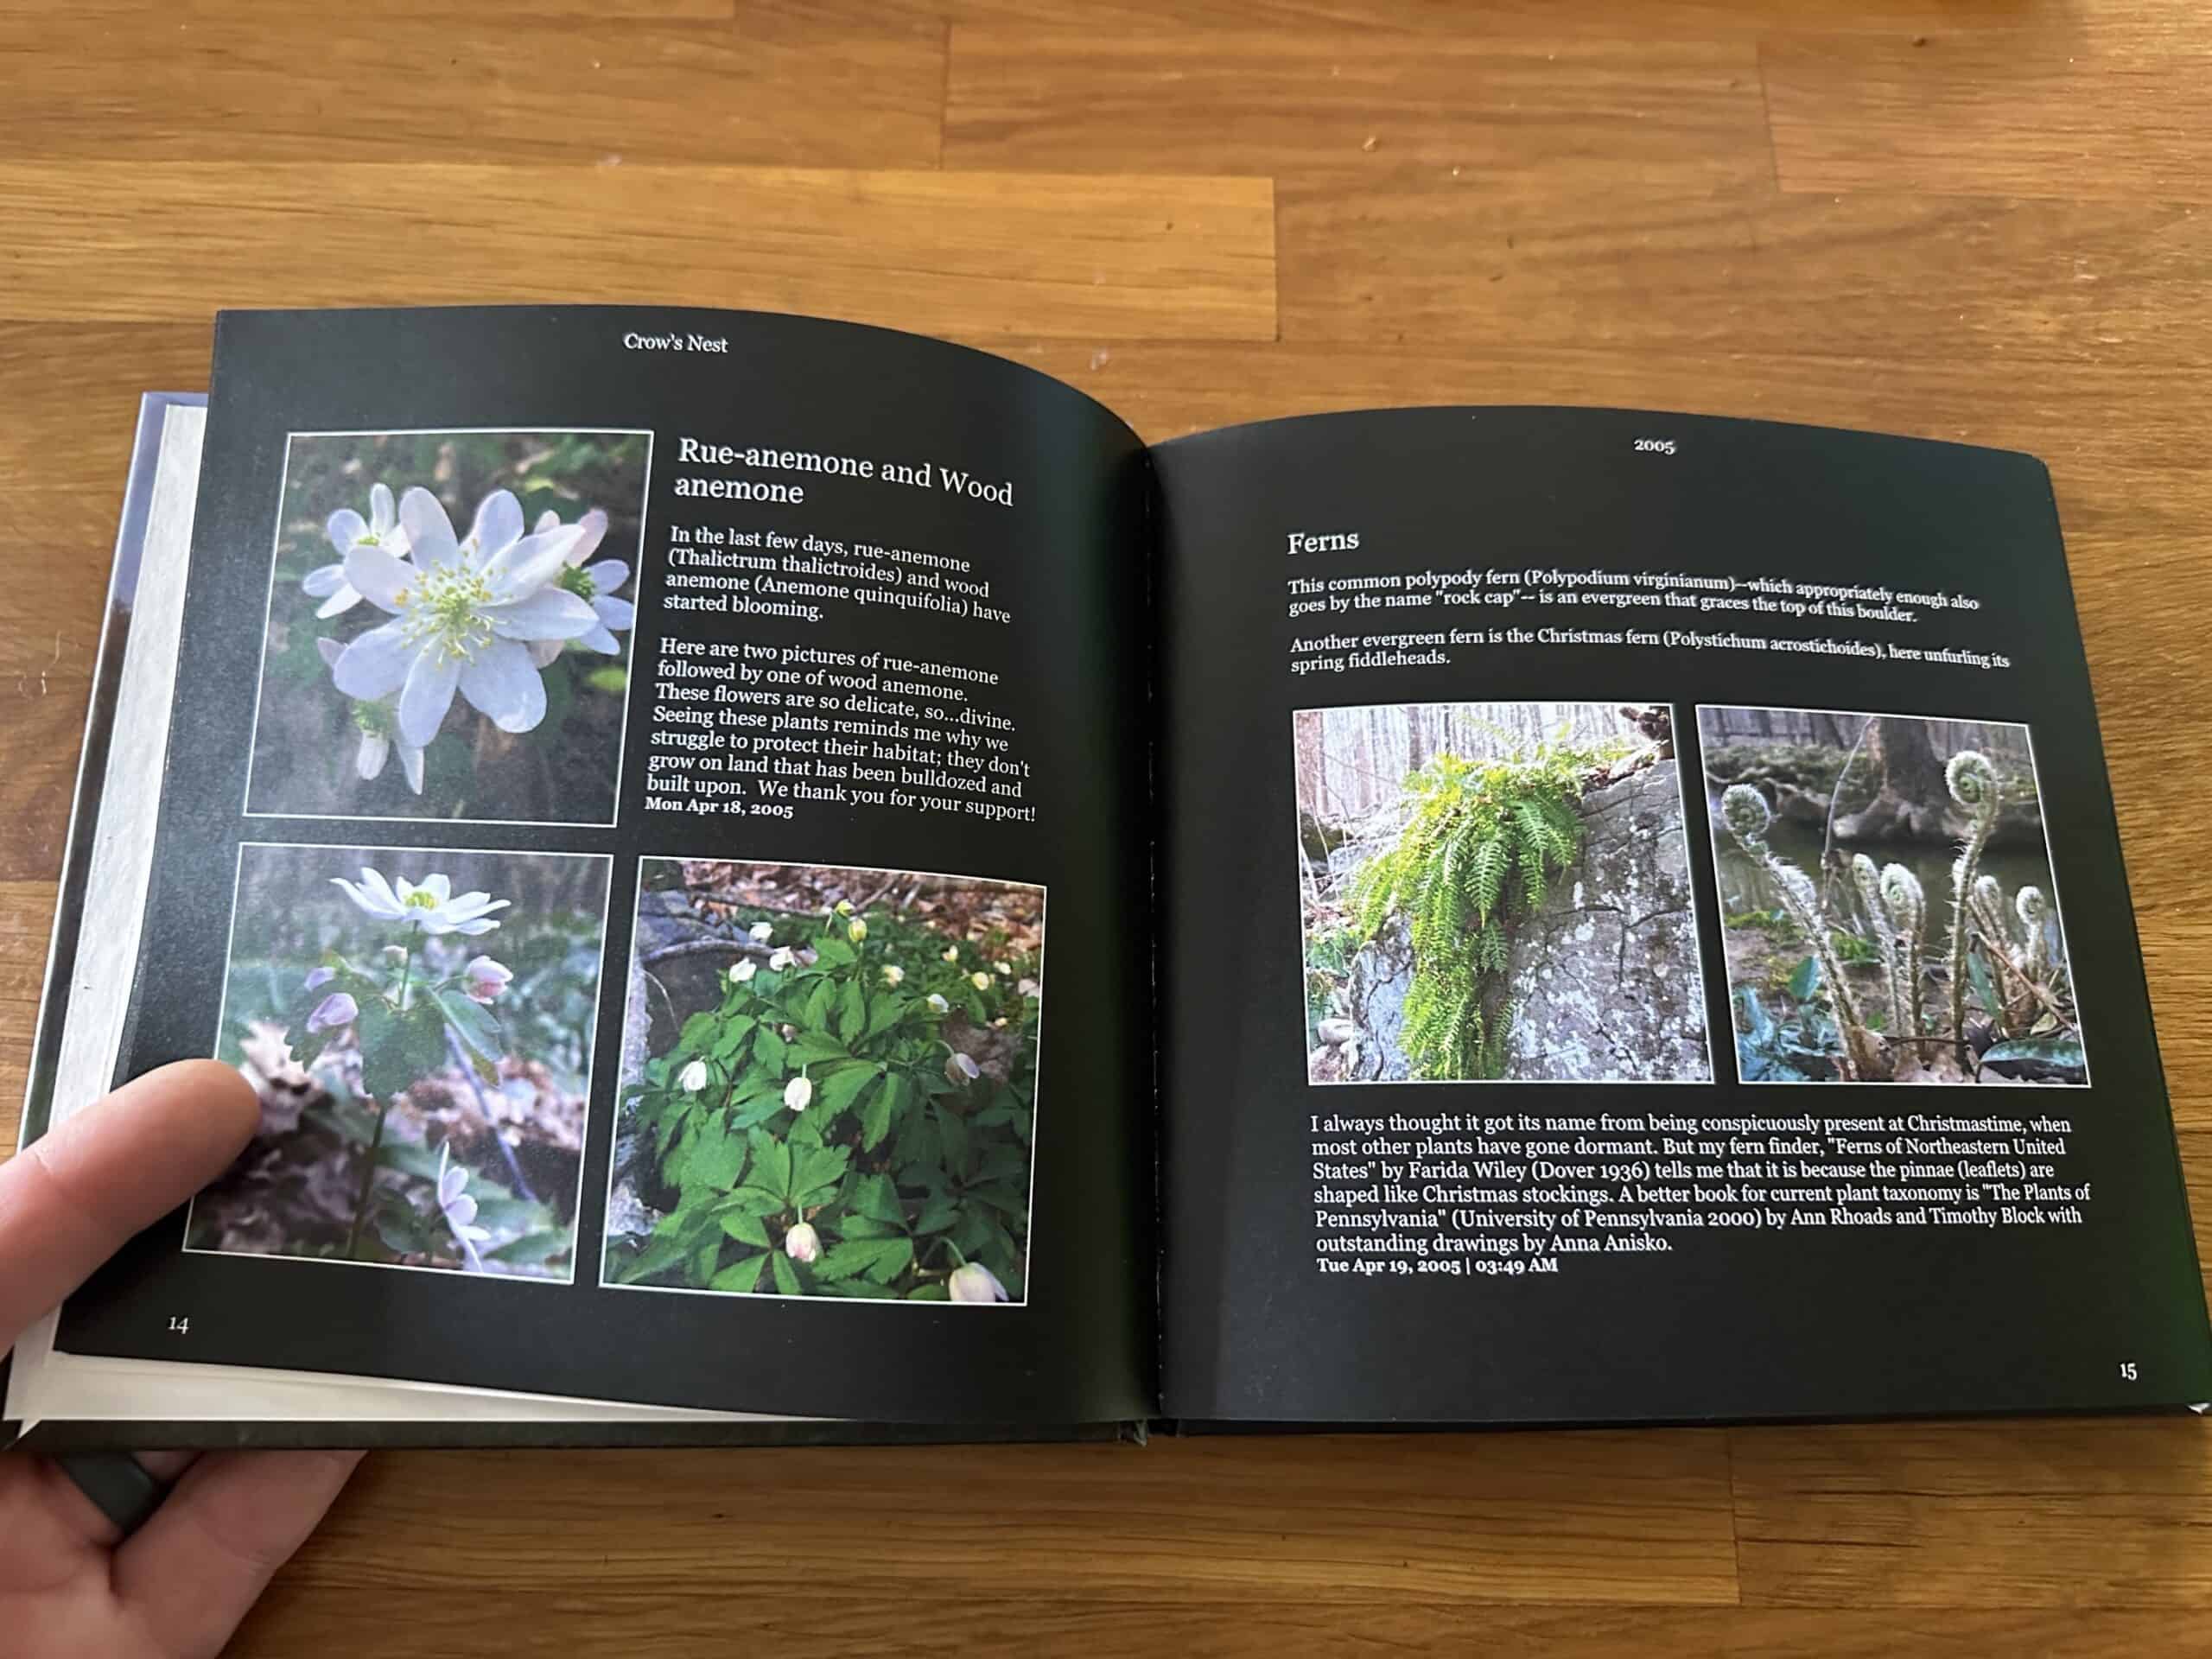 An open book showing entries from a weblog, text and pictures of flowers